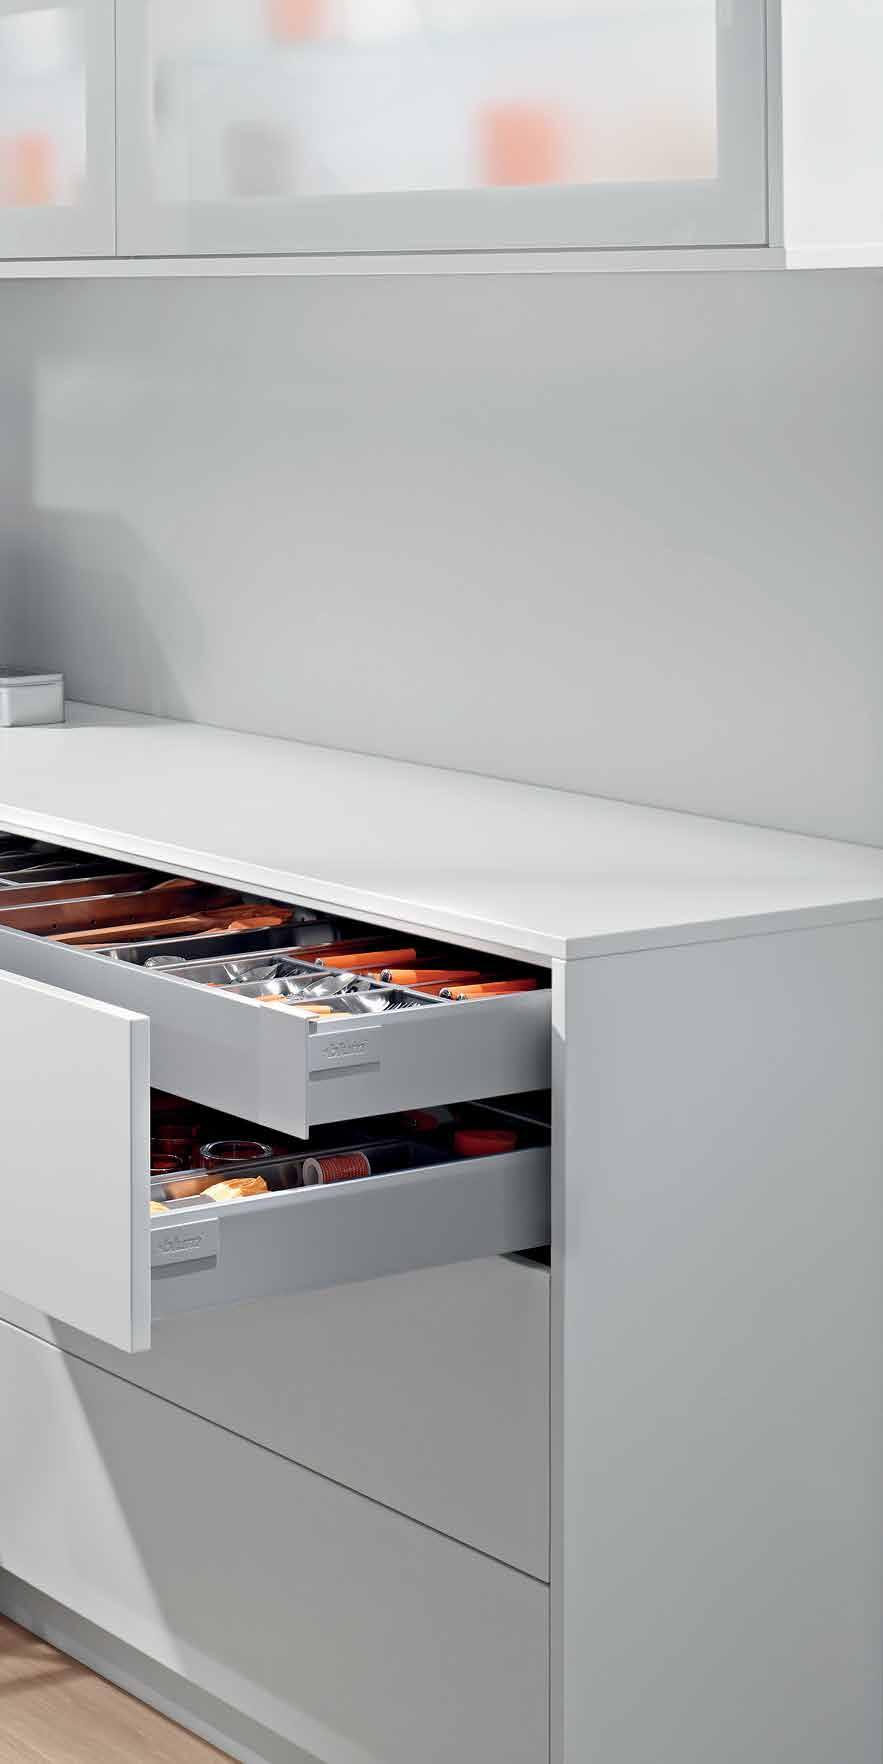 Standard Drawers TANDEMBOX works perfectly as standard drawers.